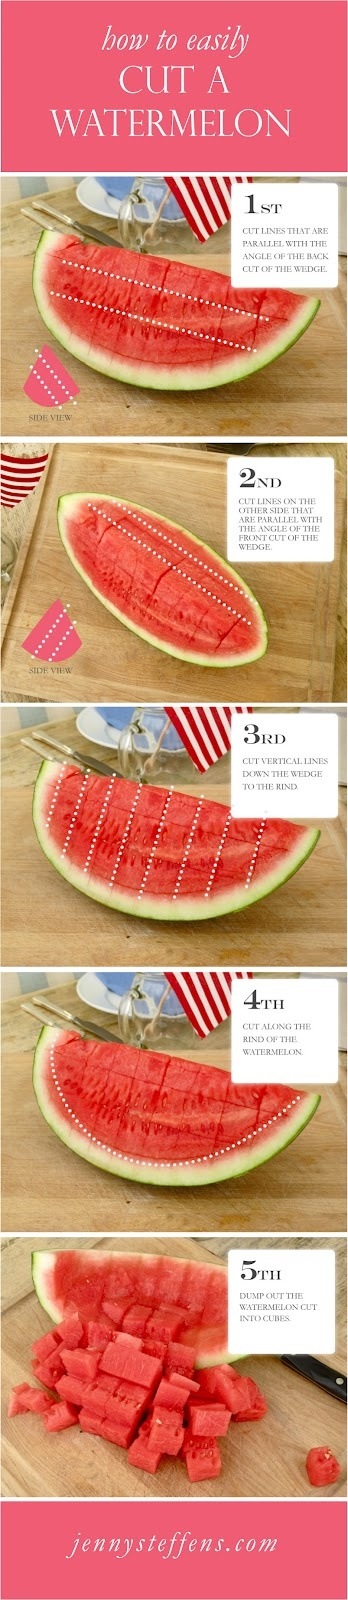 Hack #26: Another perfect way to cut a watermelon